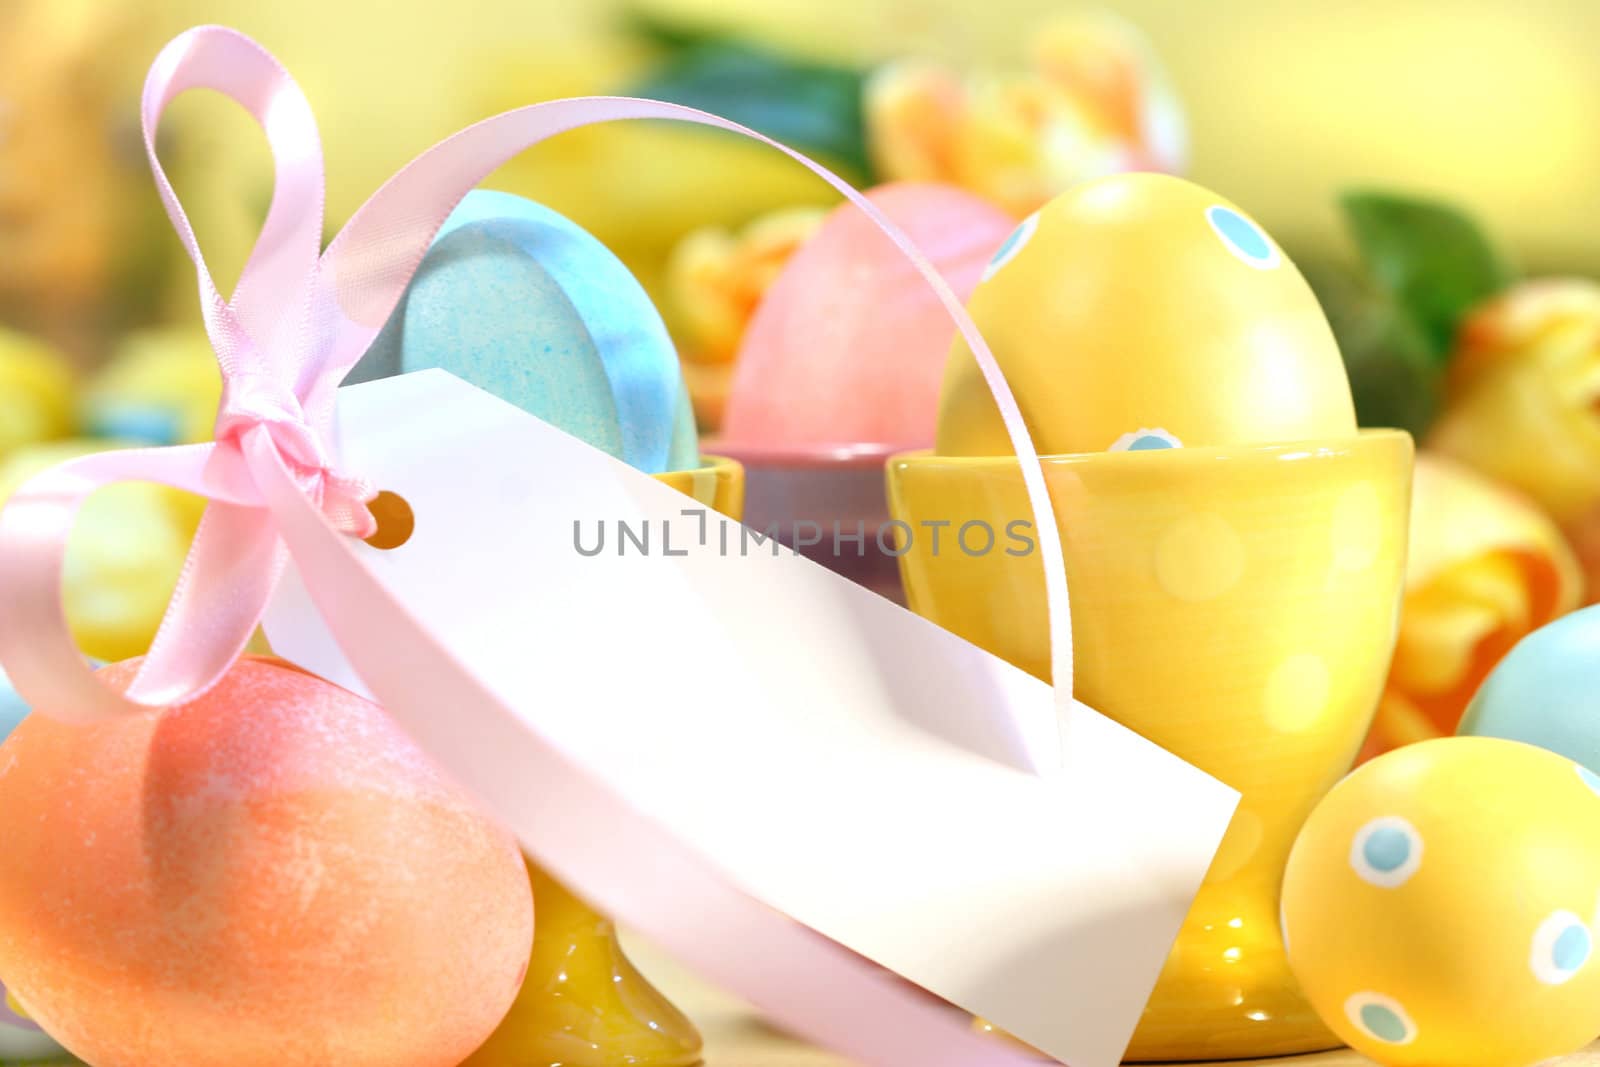 Festive decorations and eggs with card 